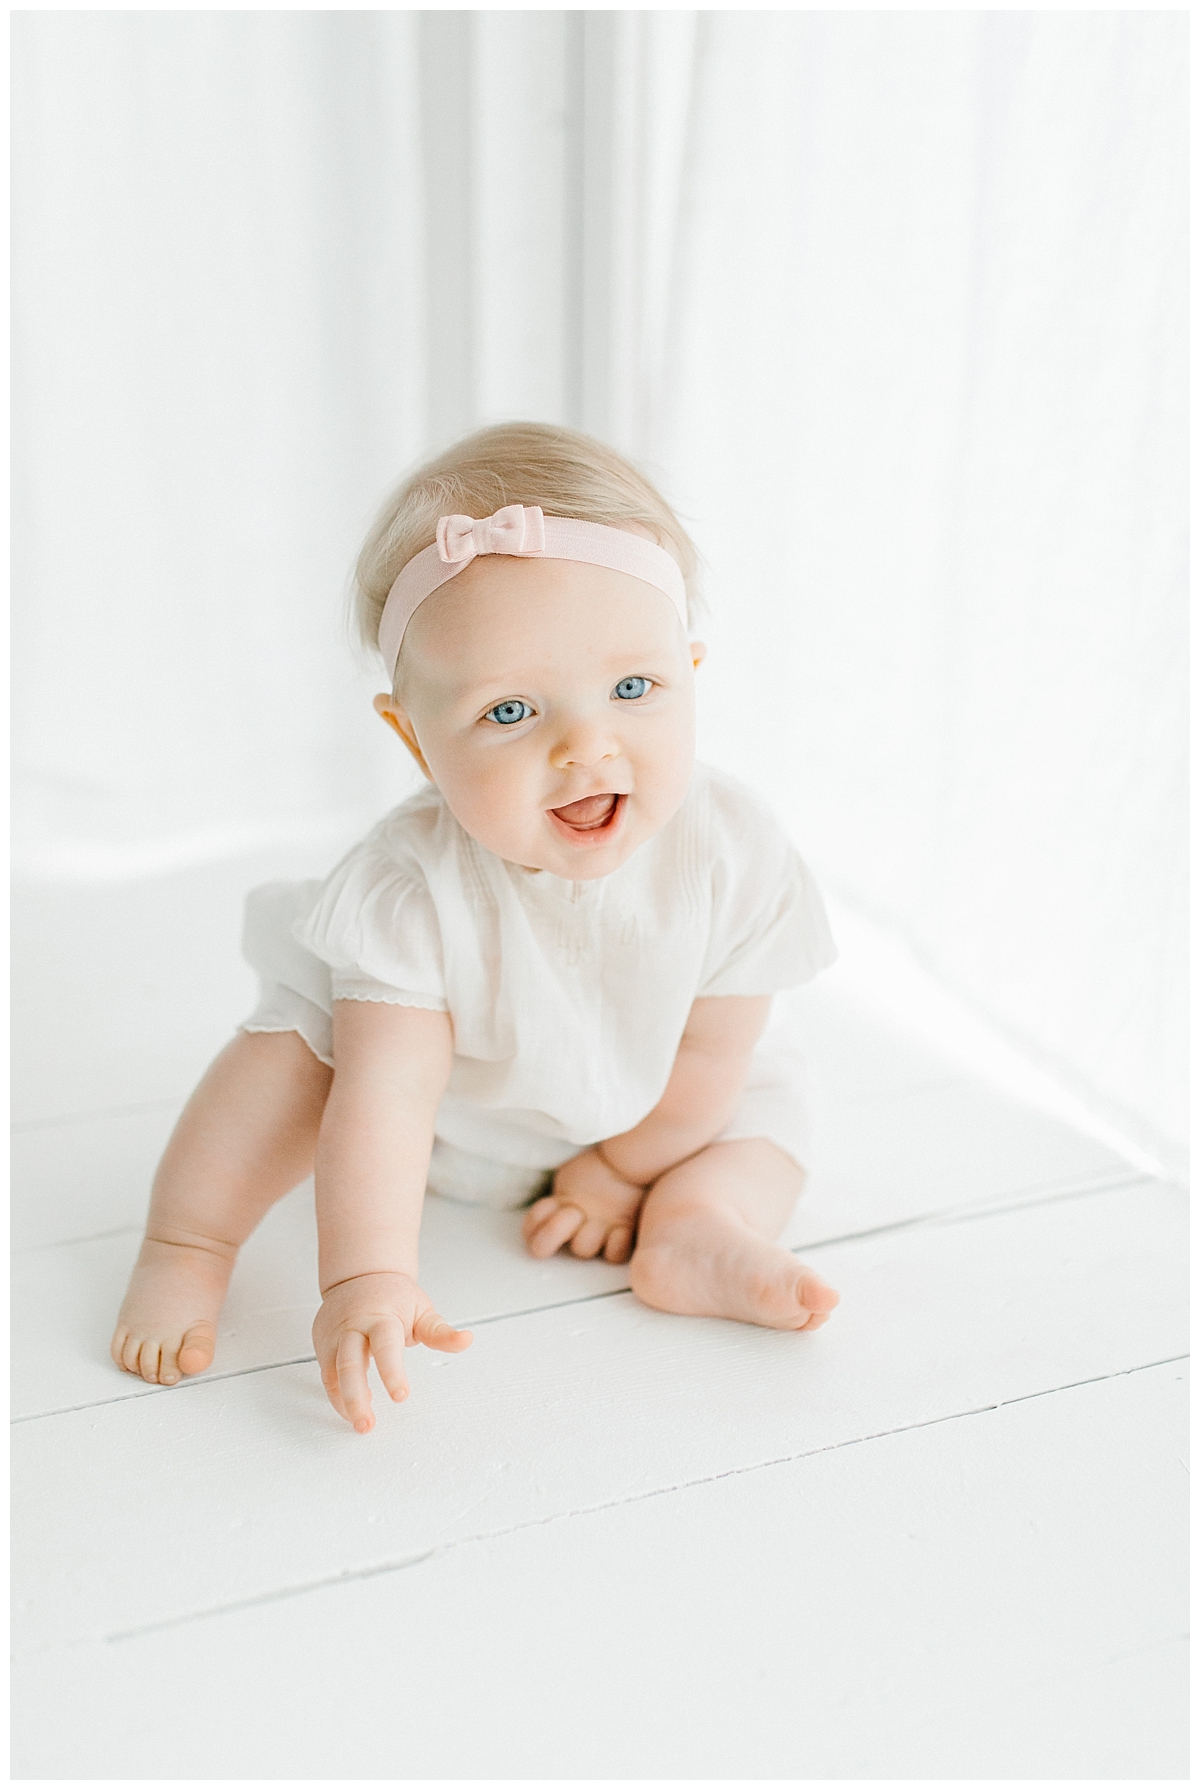 The Sweetest Six Month Old Studio Session | Emma Rose Company | Seattle Lifestyle Photographer White Studio Child Session.jpg